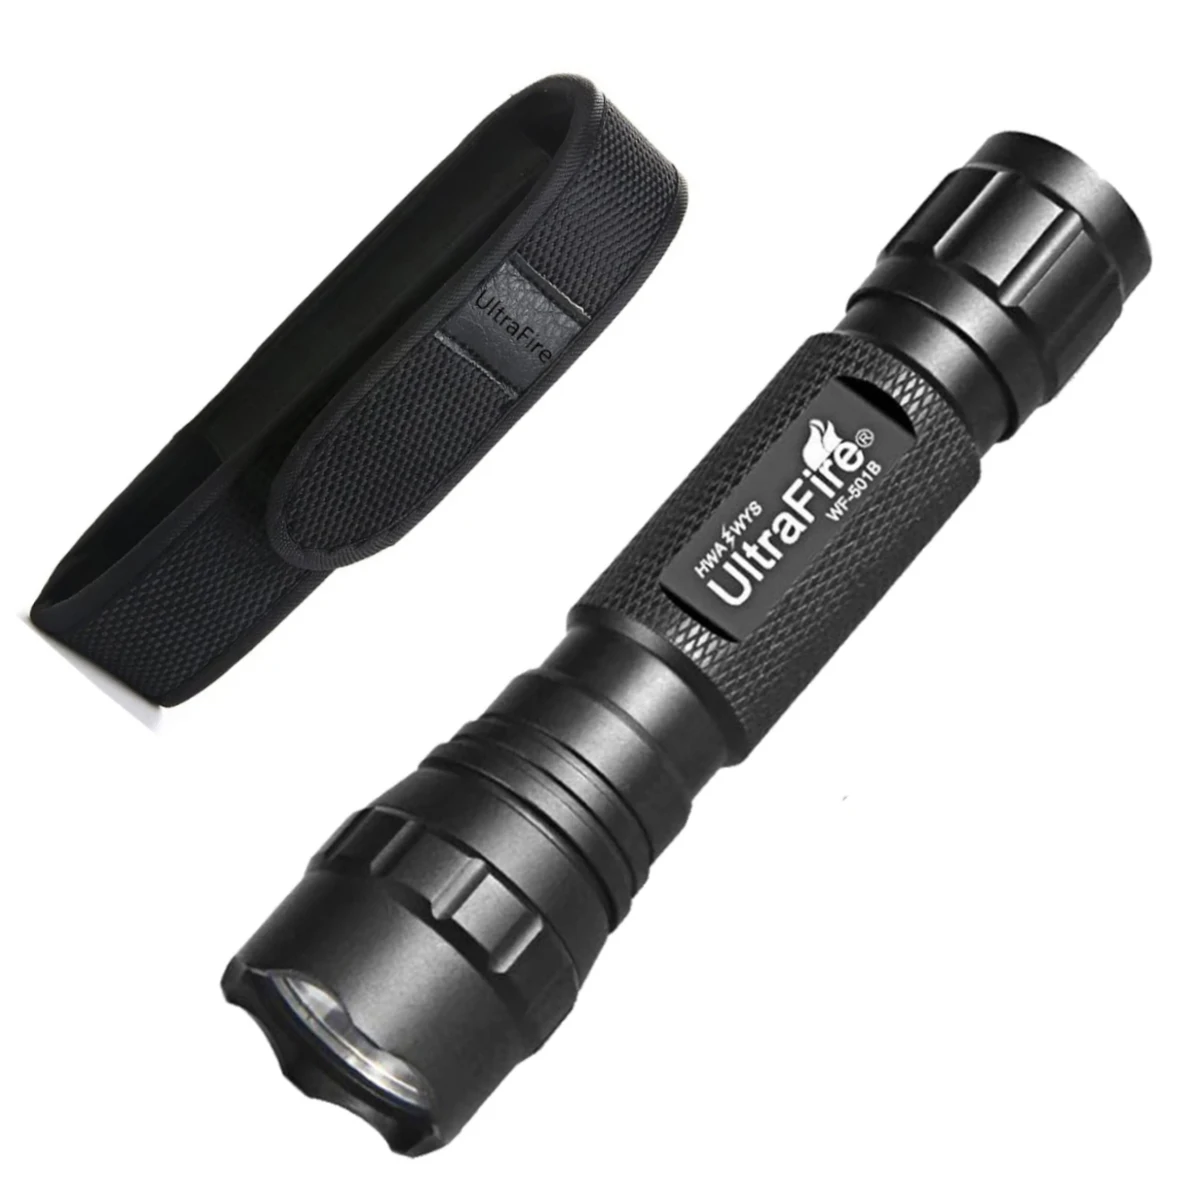 

UltraFire WF-501B LED Tactical Flashlight Powerful Waterproof Lantern Outdoor Camping Torch Light with 18650 Battery 119 Holster